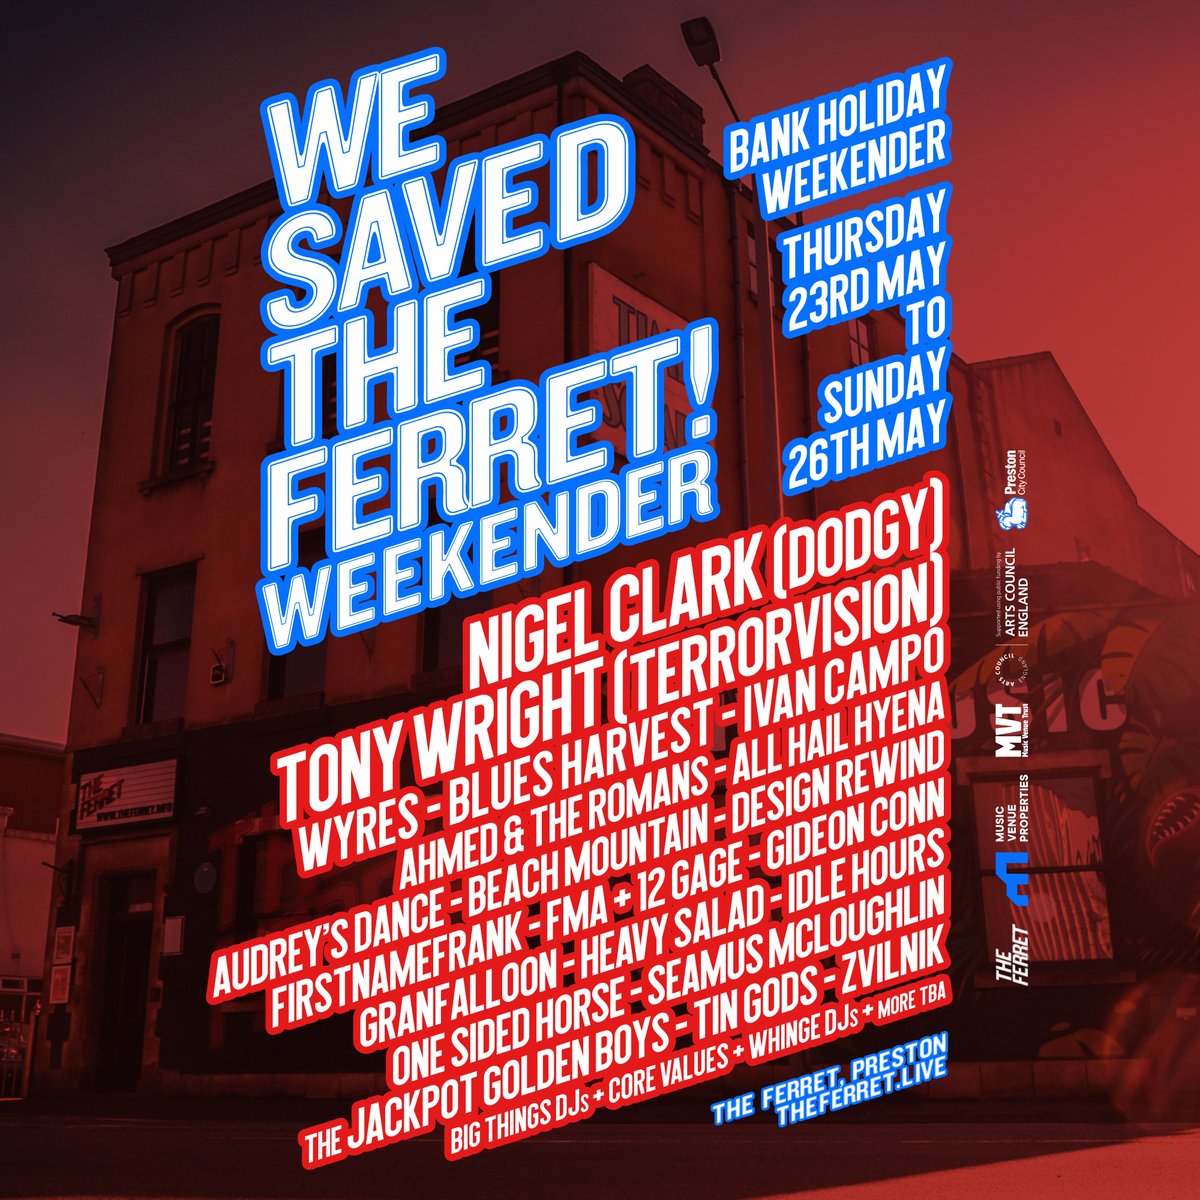 ICYMI - We Saved The Ferret! So why not have a party to celebrate right? Next weekend - all bank holiday - We Saved The Ferret Weekender! ft Nigel Clark (Dodgy), Tony Wright (Terrorvision), Wyres & many more. The weekender is open to anyone & everyone, with tickets on sale now!